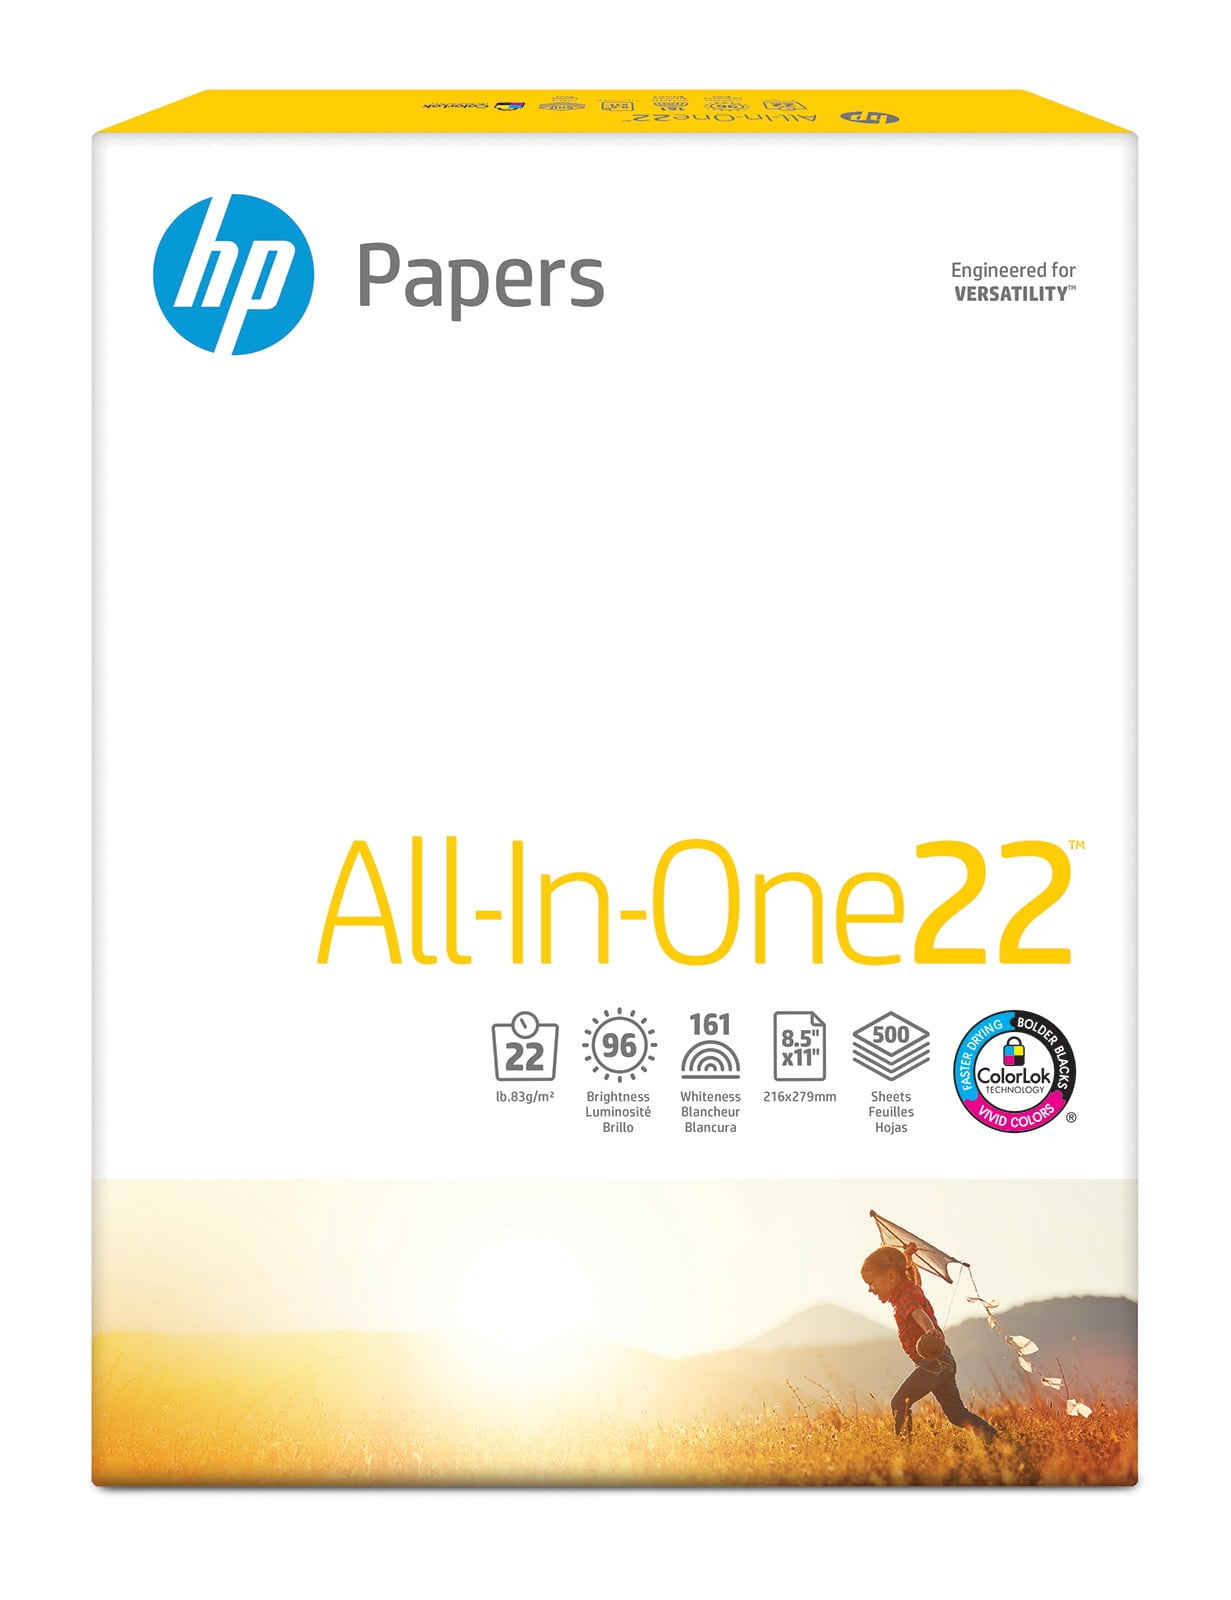 HP All In One22 Printer Copier Paper Letter Size 8 12 x 11 Ream Of